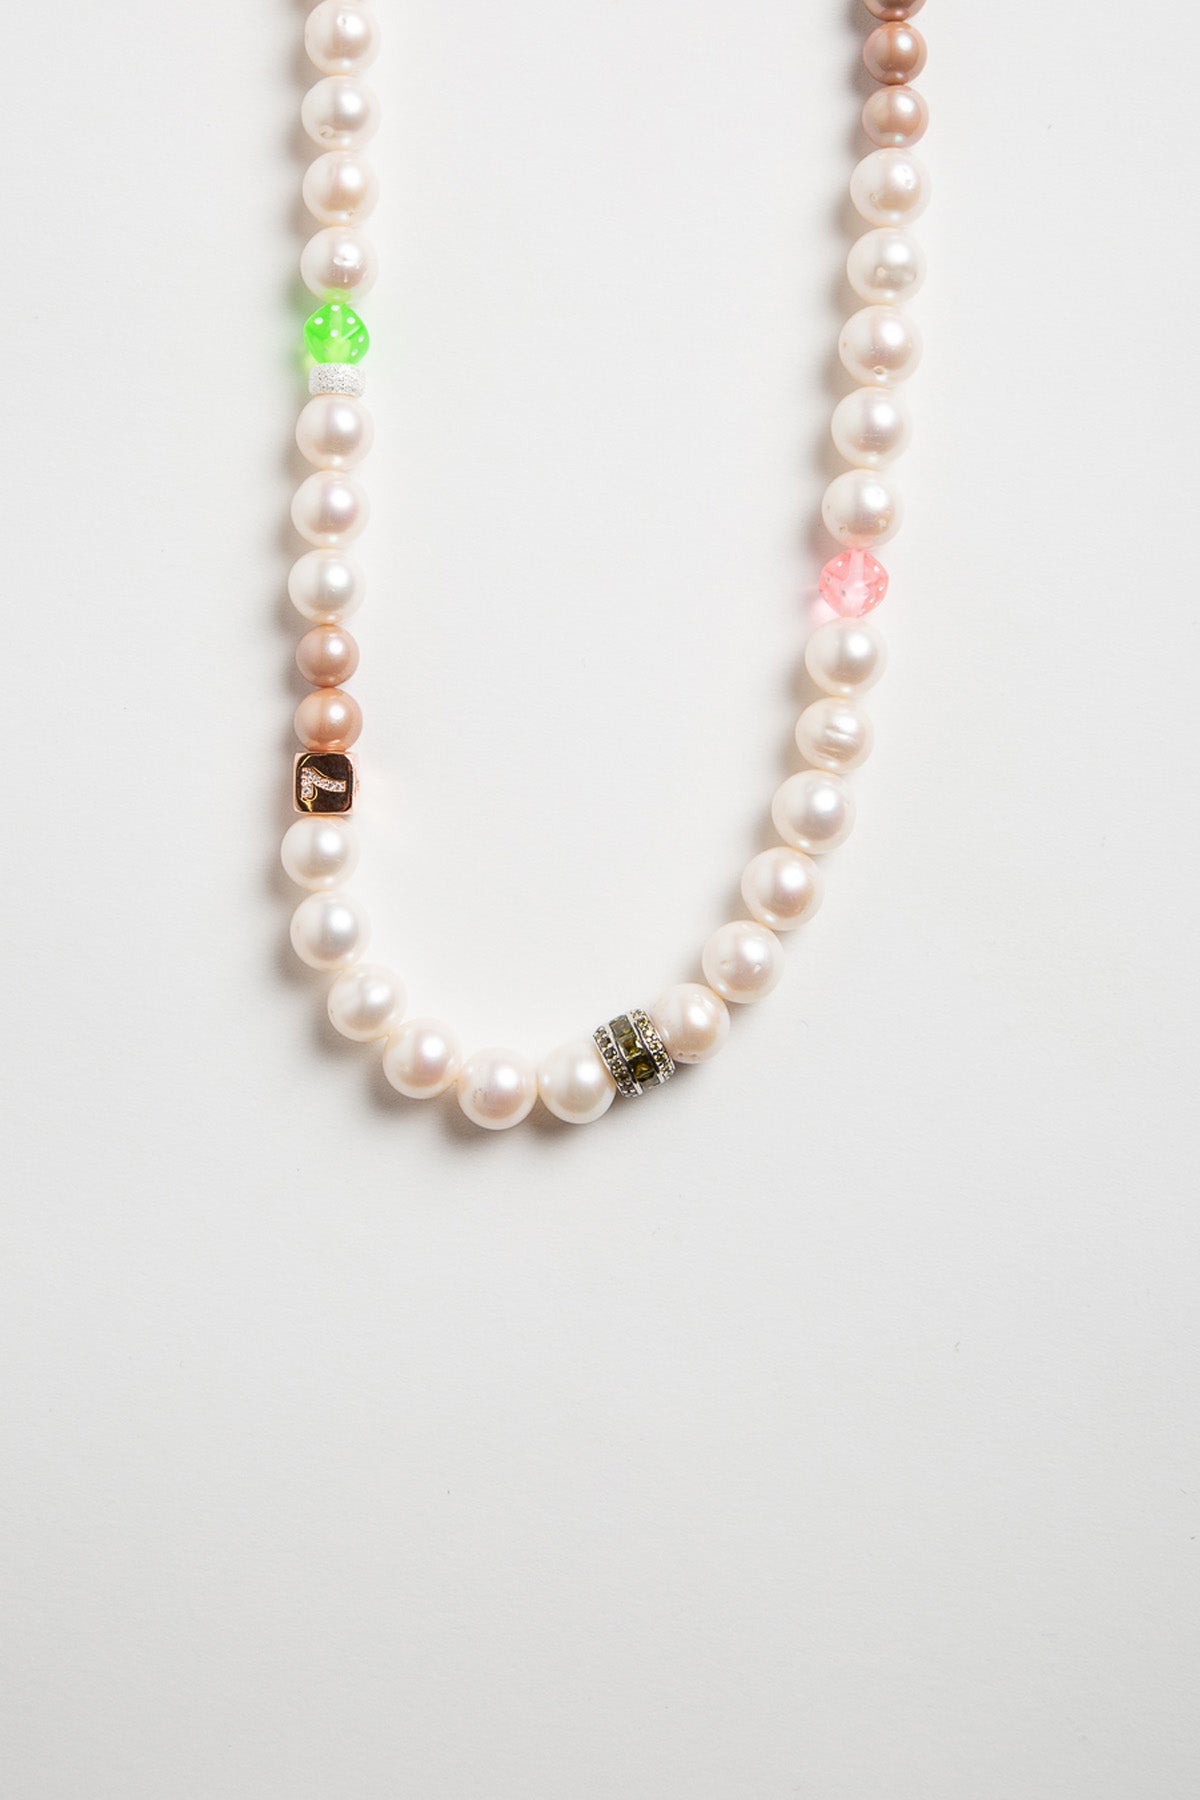 TRIN-KET | MIXED PEARL CHOKER NECKLACE